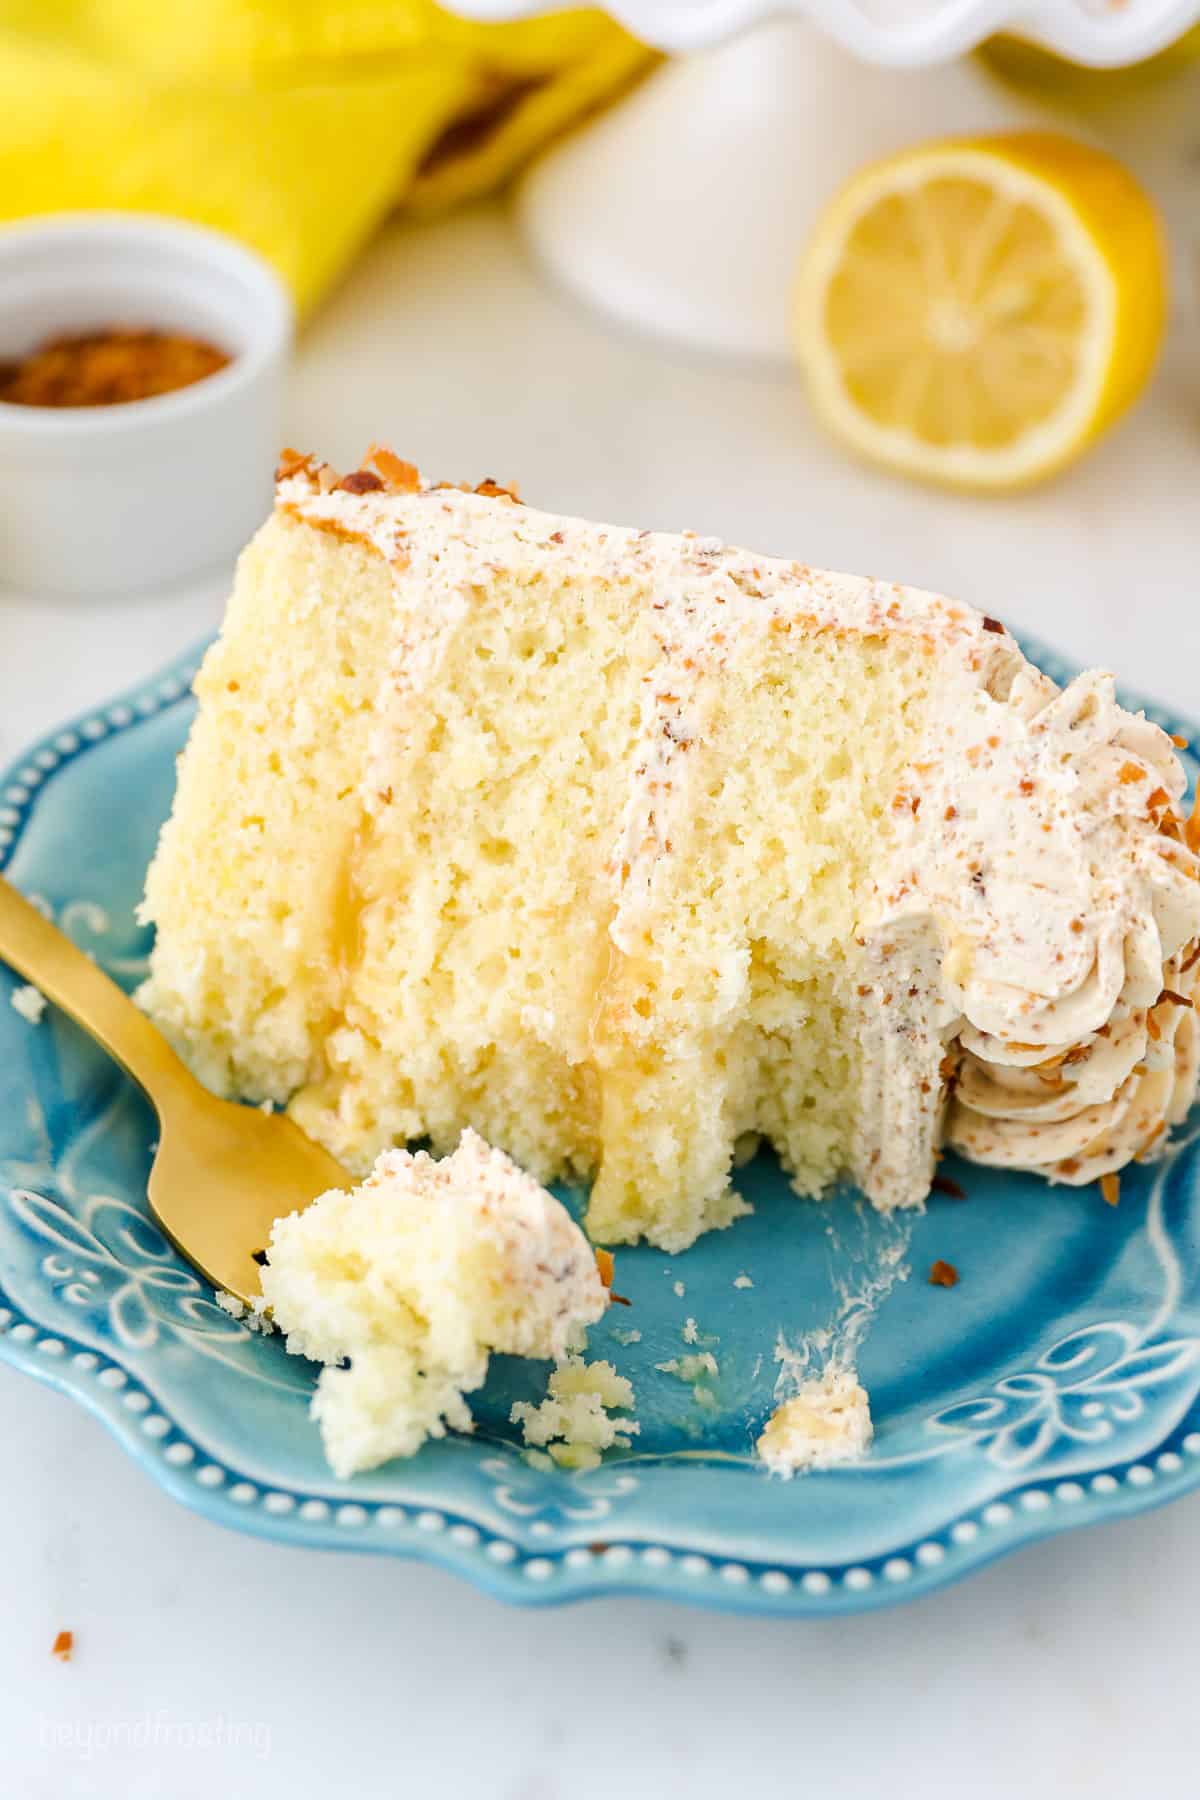 A partially eaten slice of lemon coconut cake on a blue plate, next to a fork.